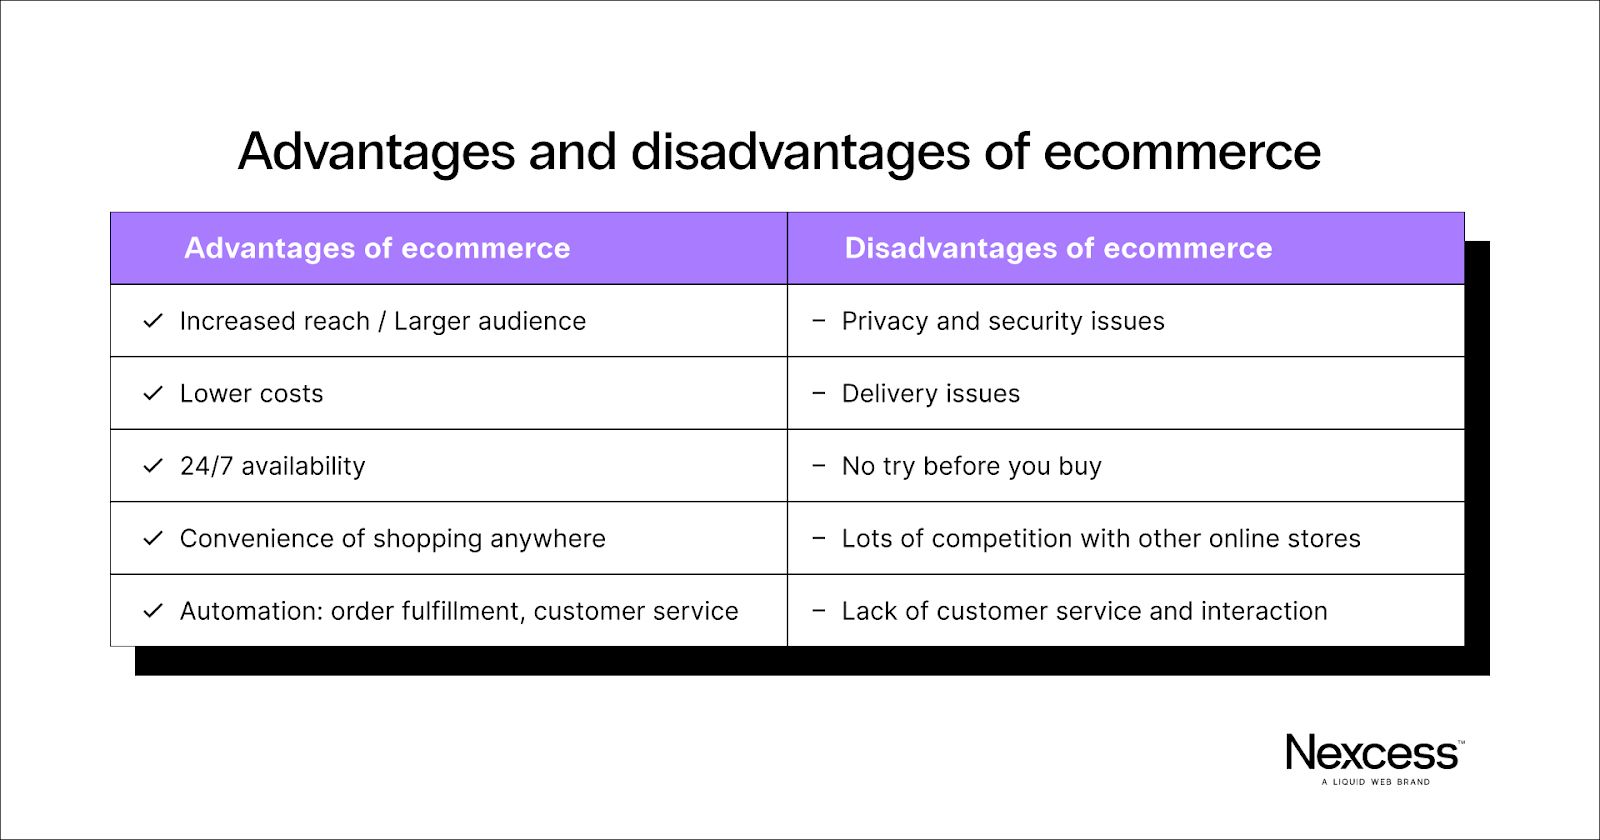 Advantages and disadvantages of ecommerce.